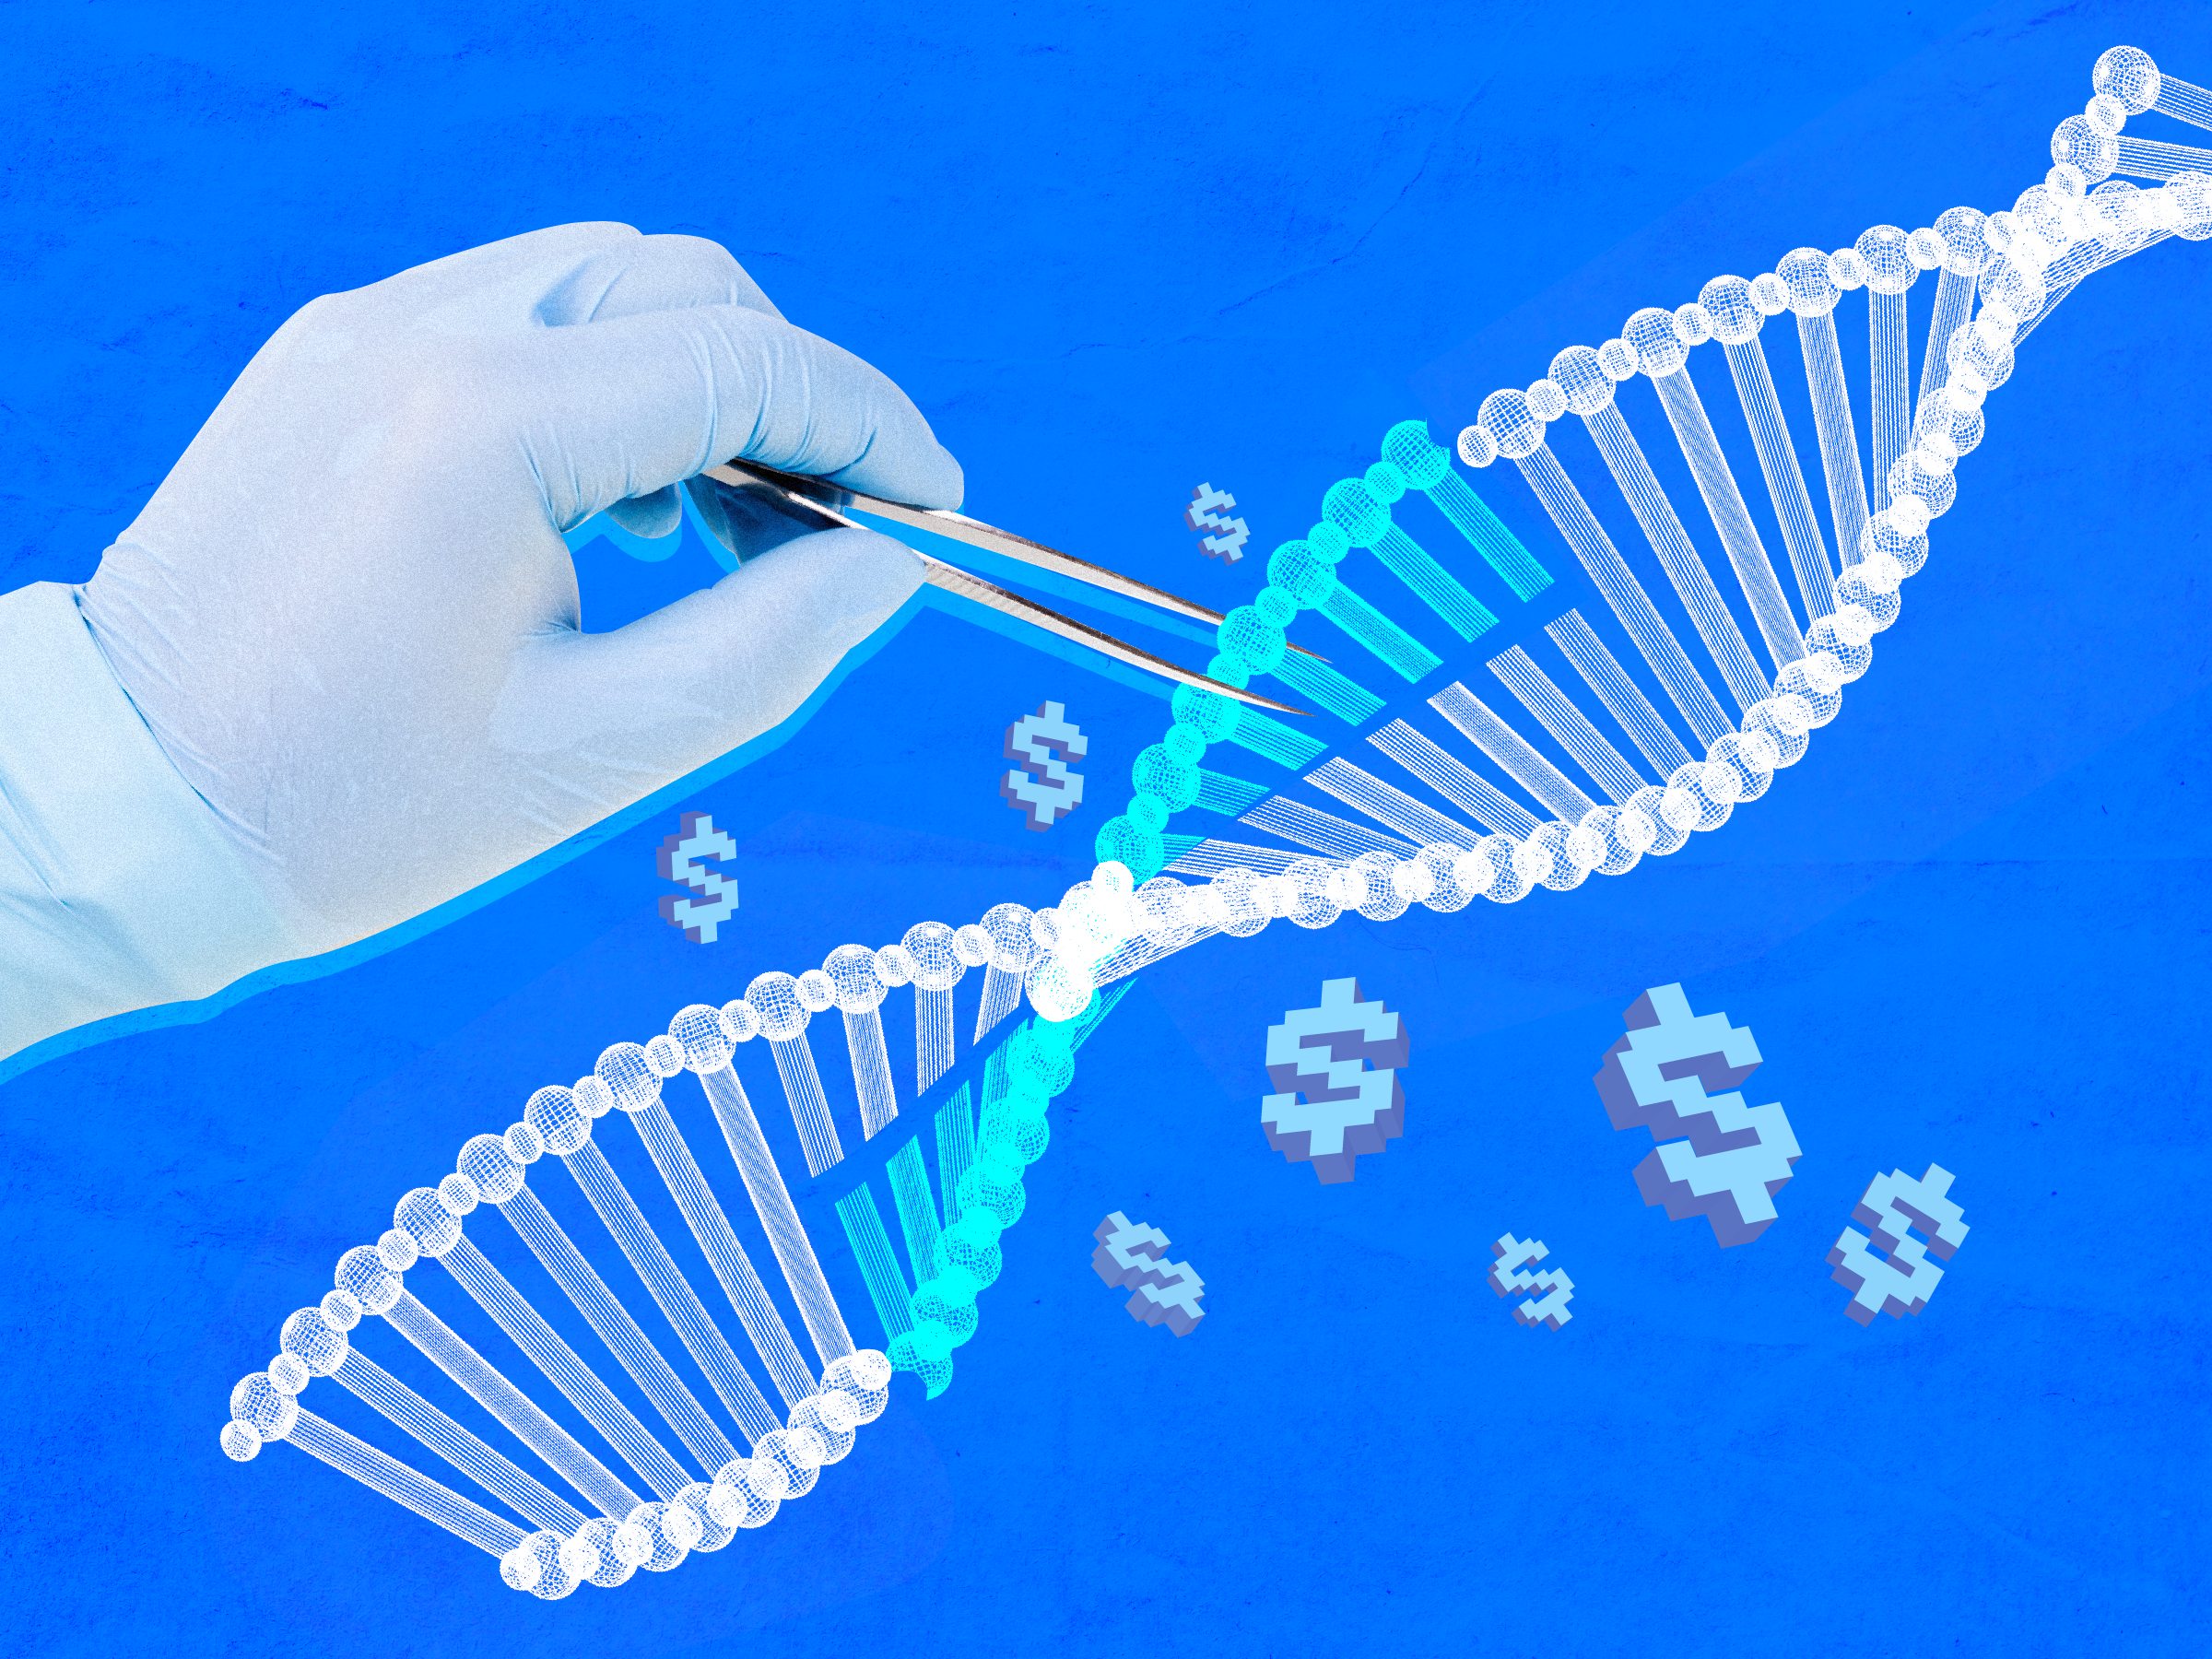 A hand with surgical glove replacing a section of DNA with tweezers, surrounded by dollar signs